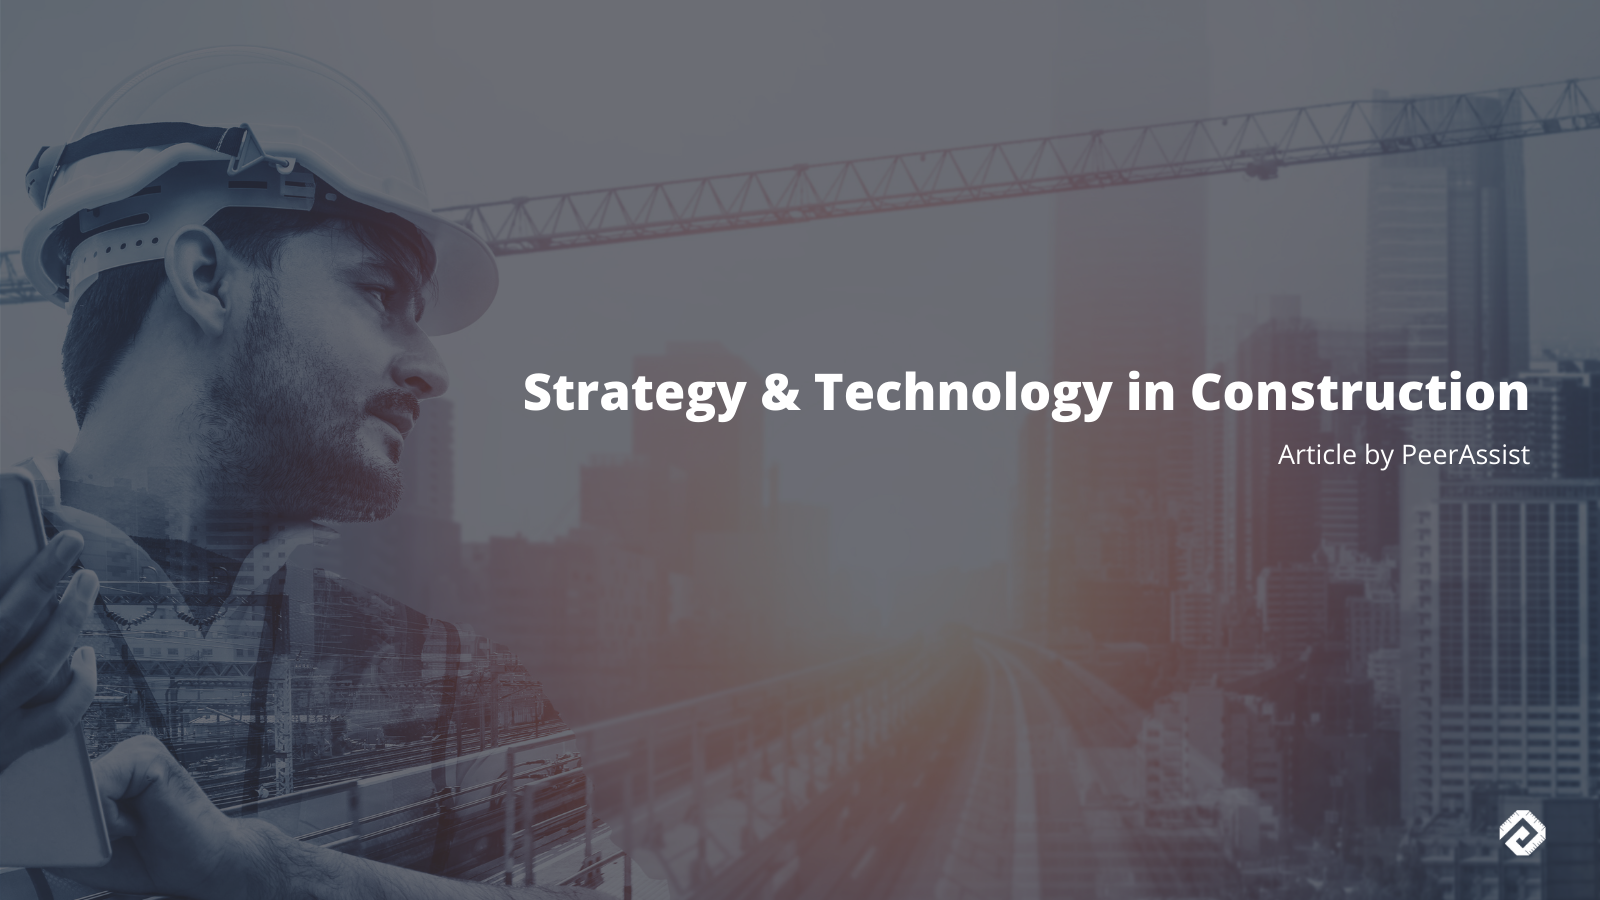 Construction Article - Strategy & Technology